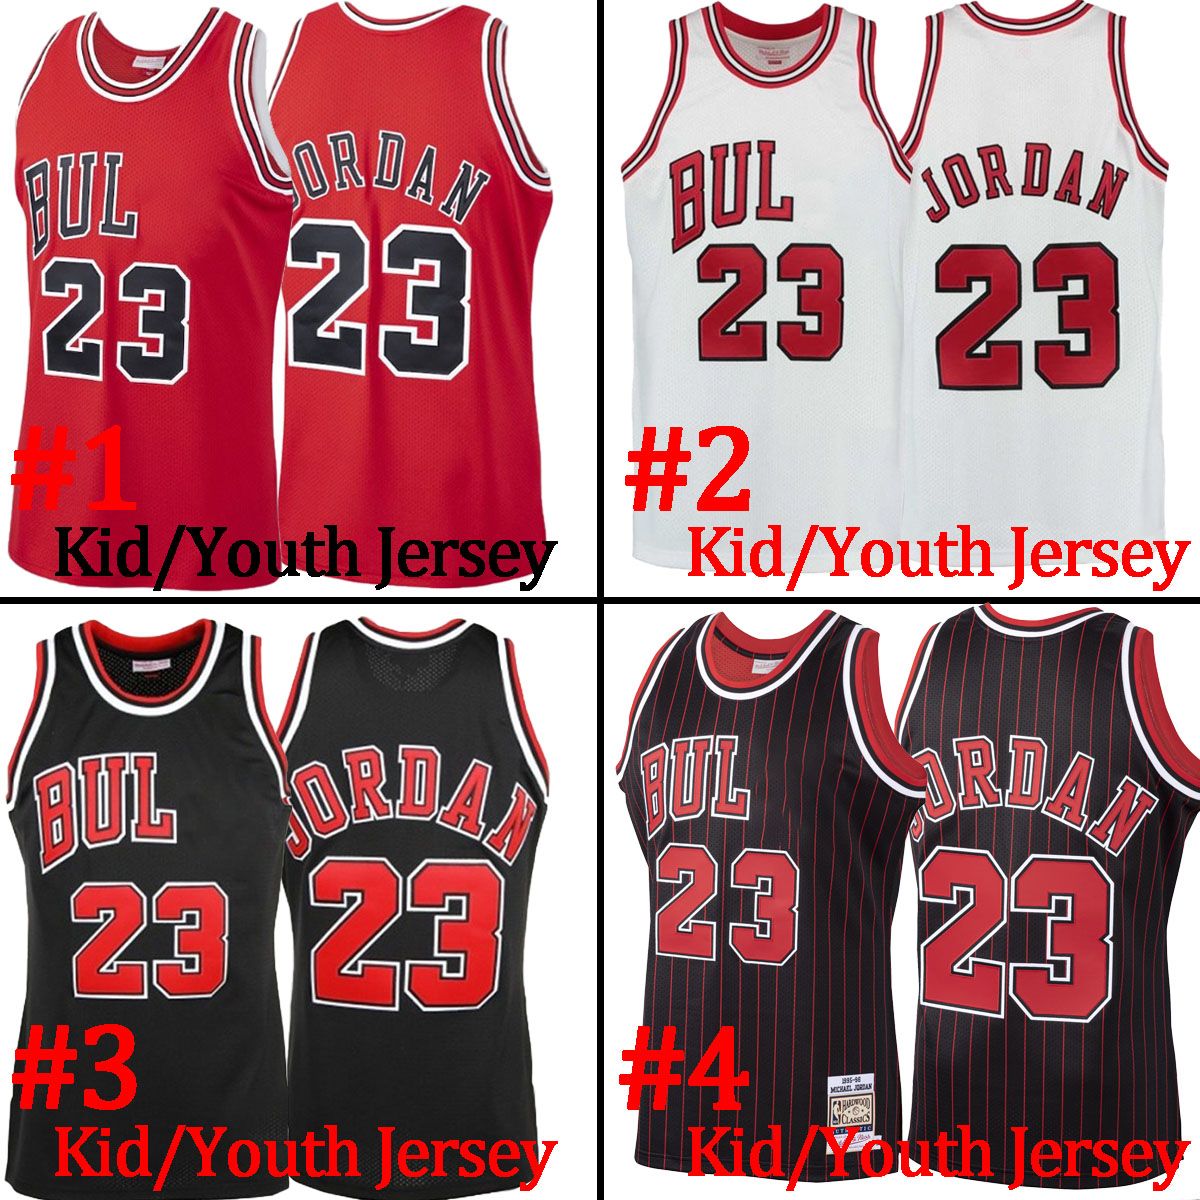 Youth/kid Jersey1